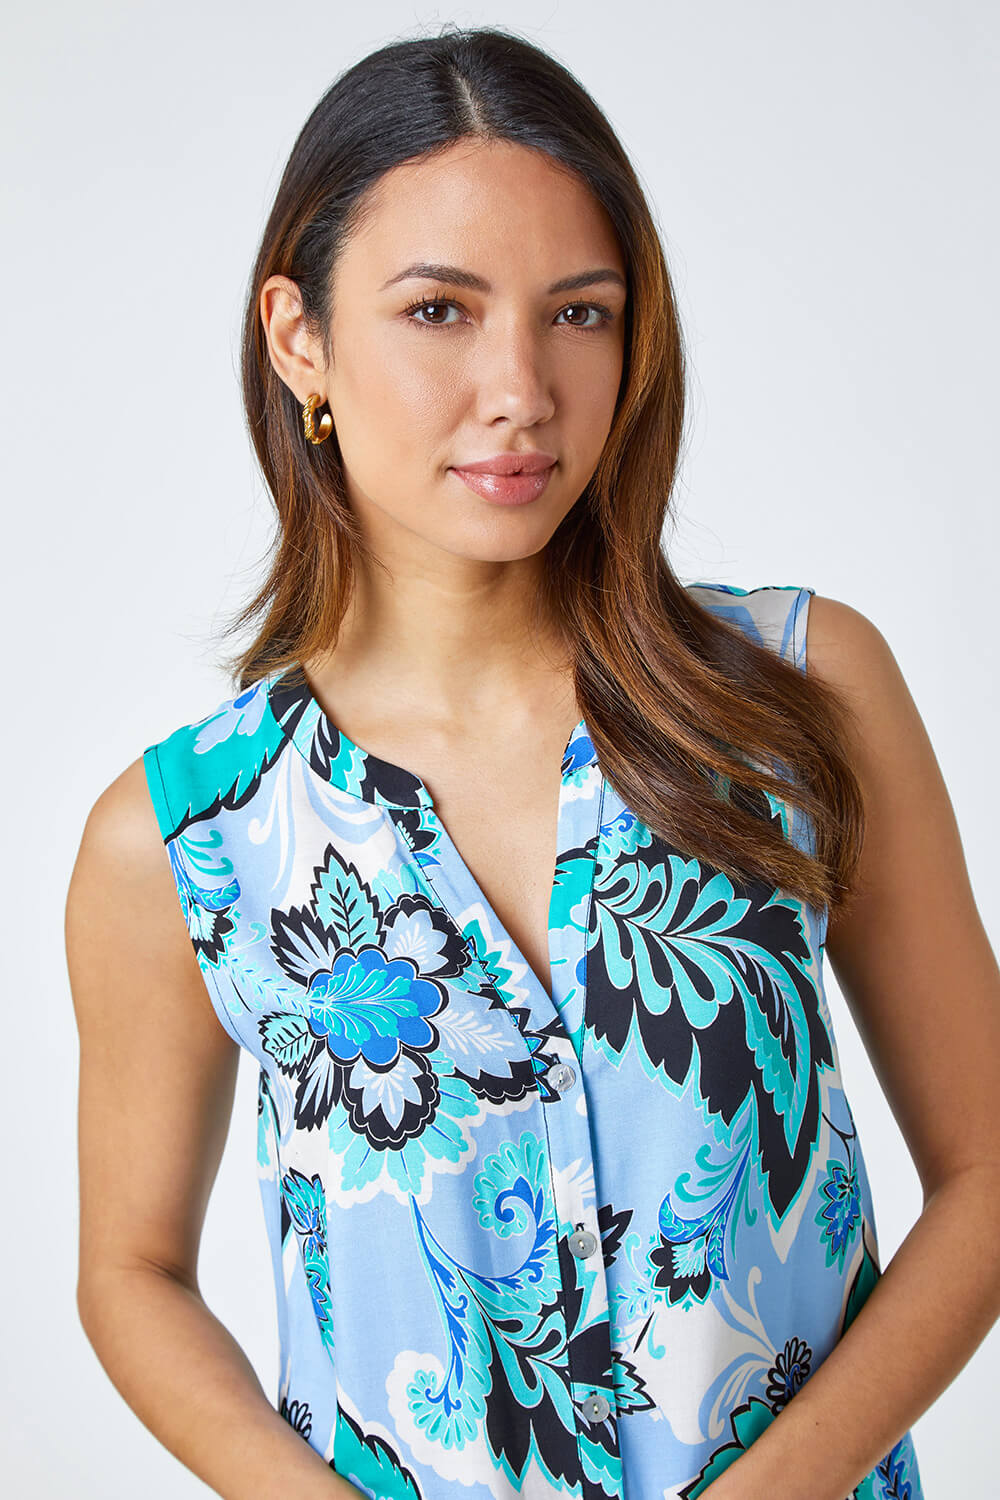 Blue Paisley Contrast Border Print Top, Image 4 of 5